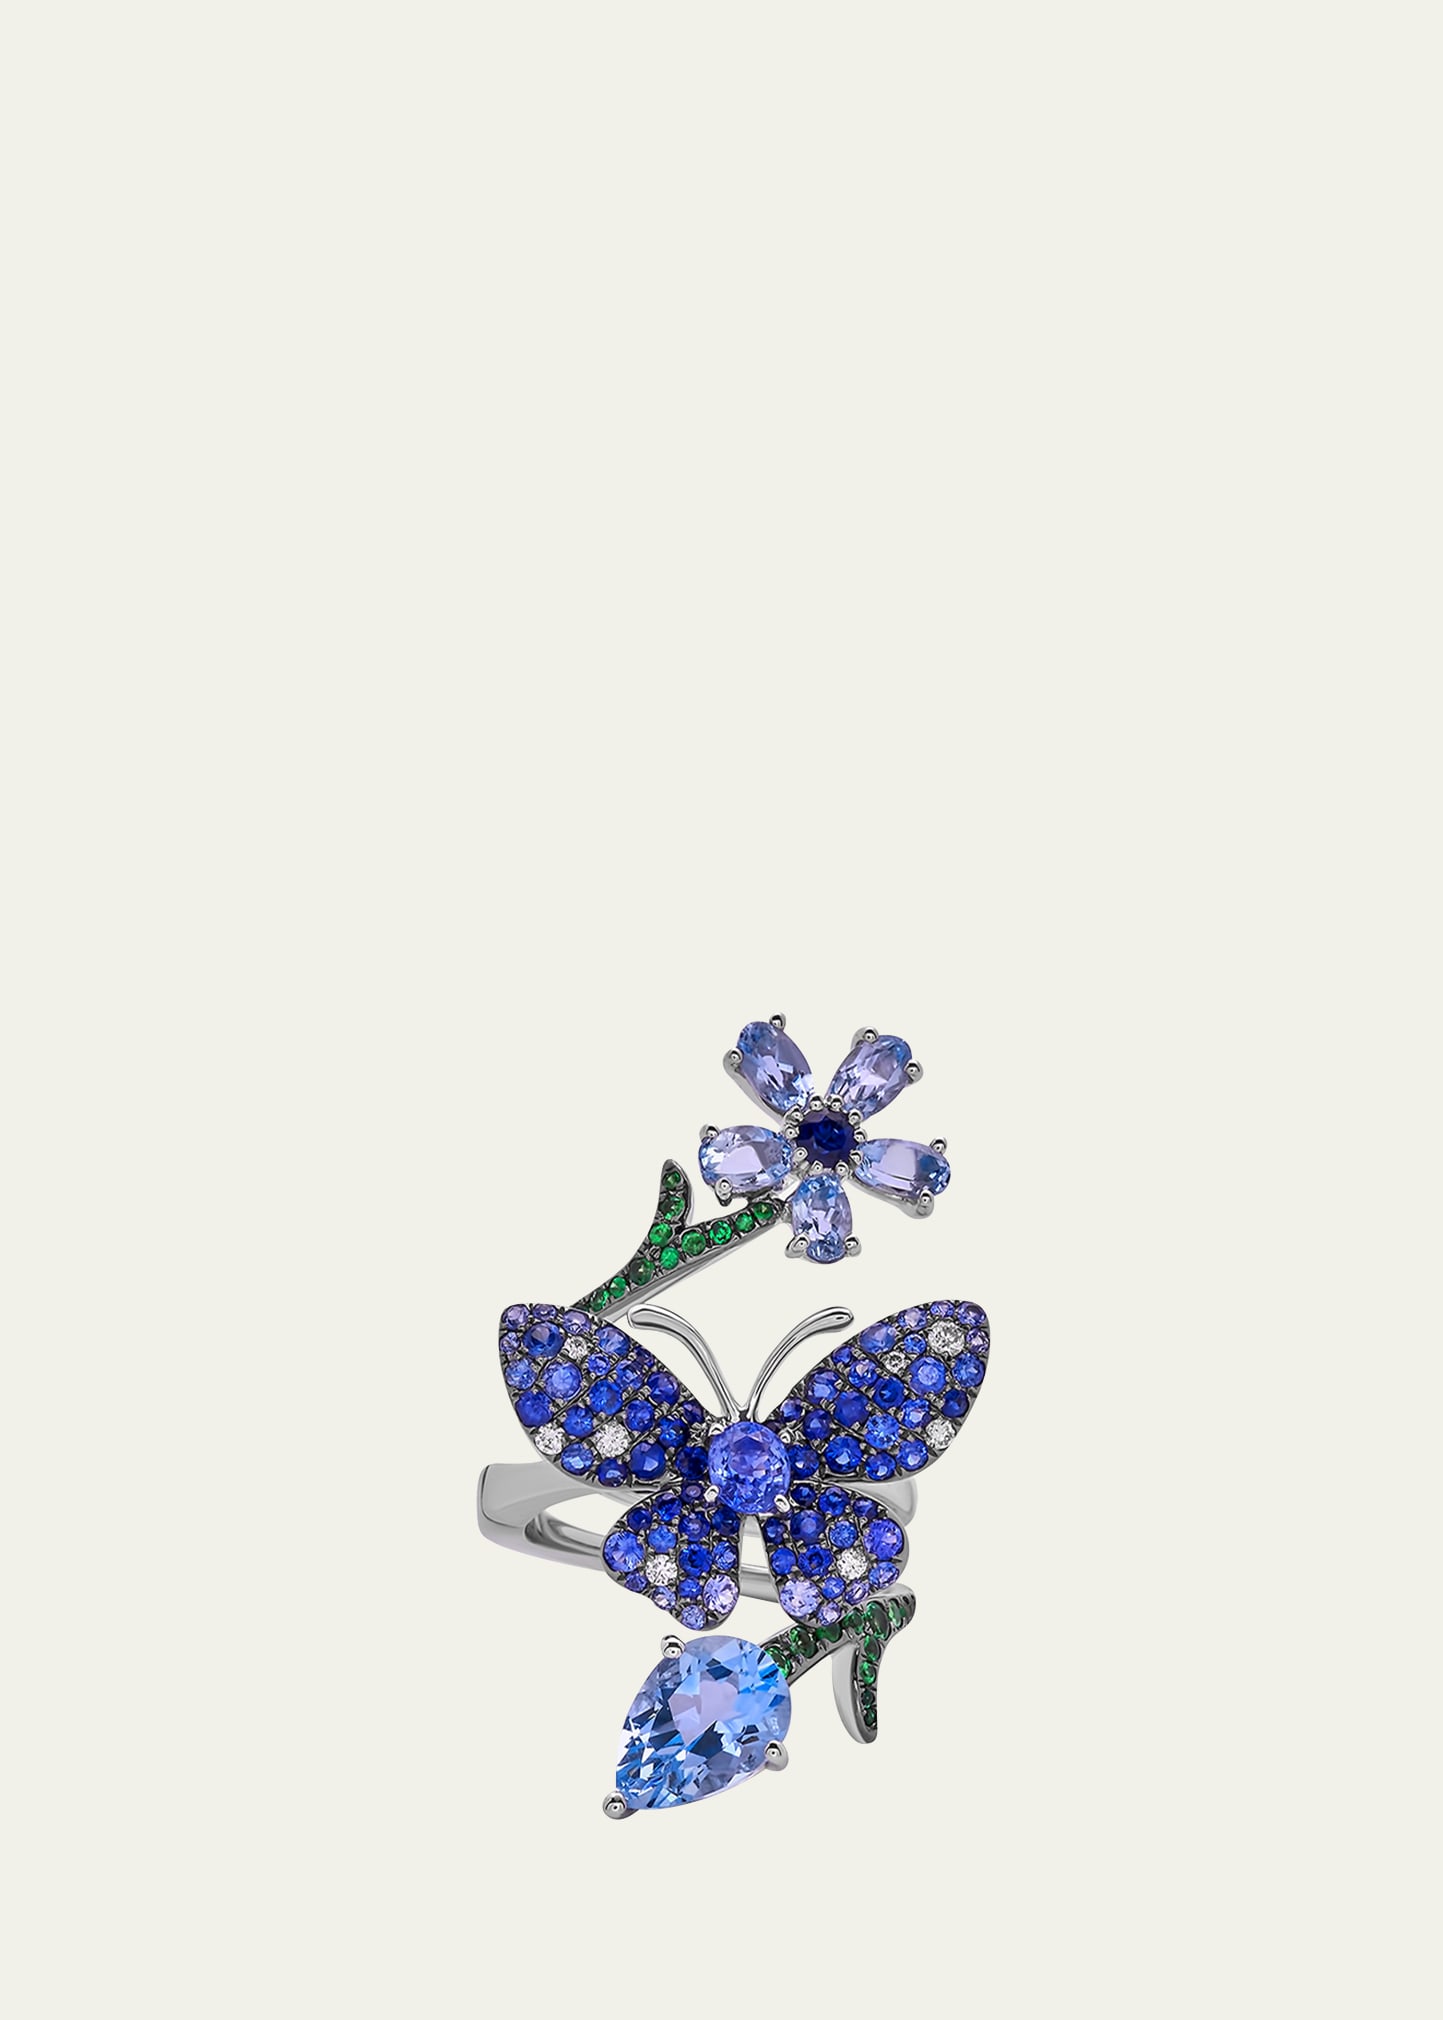 White Gold Blue Sapphire, Green Garnet, Aquamarine Ring from The Butterfly Collection, Size 7